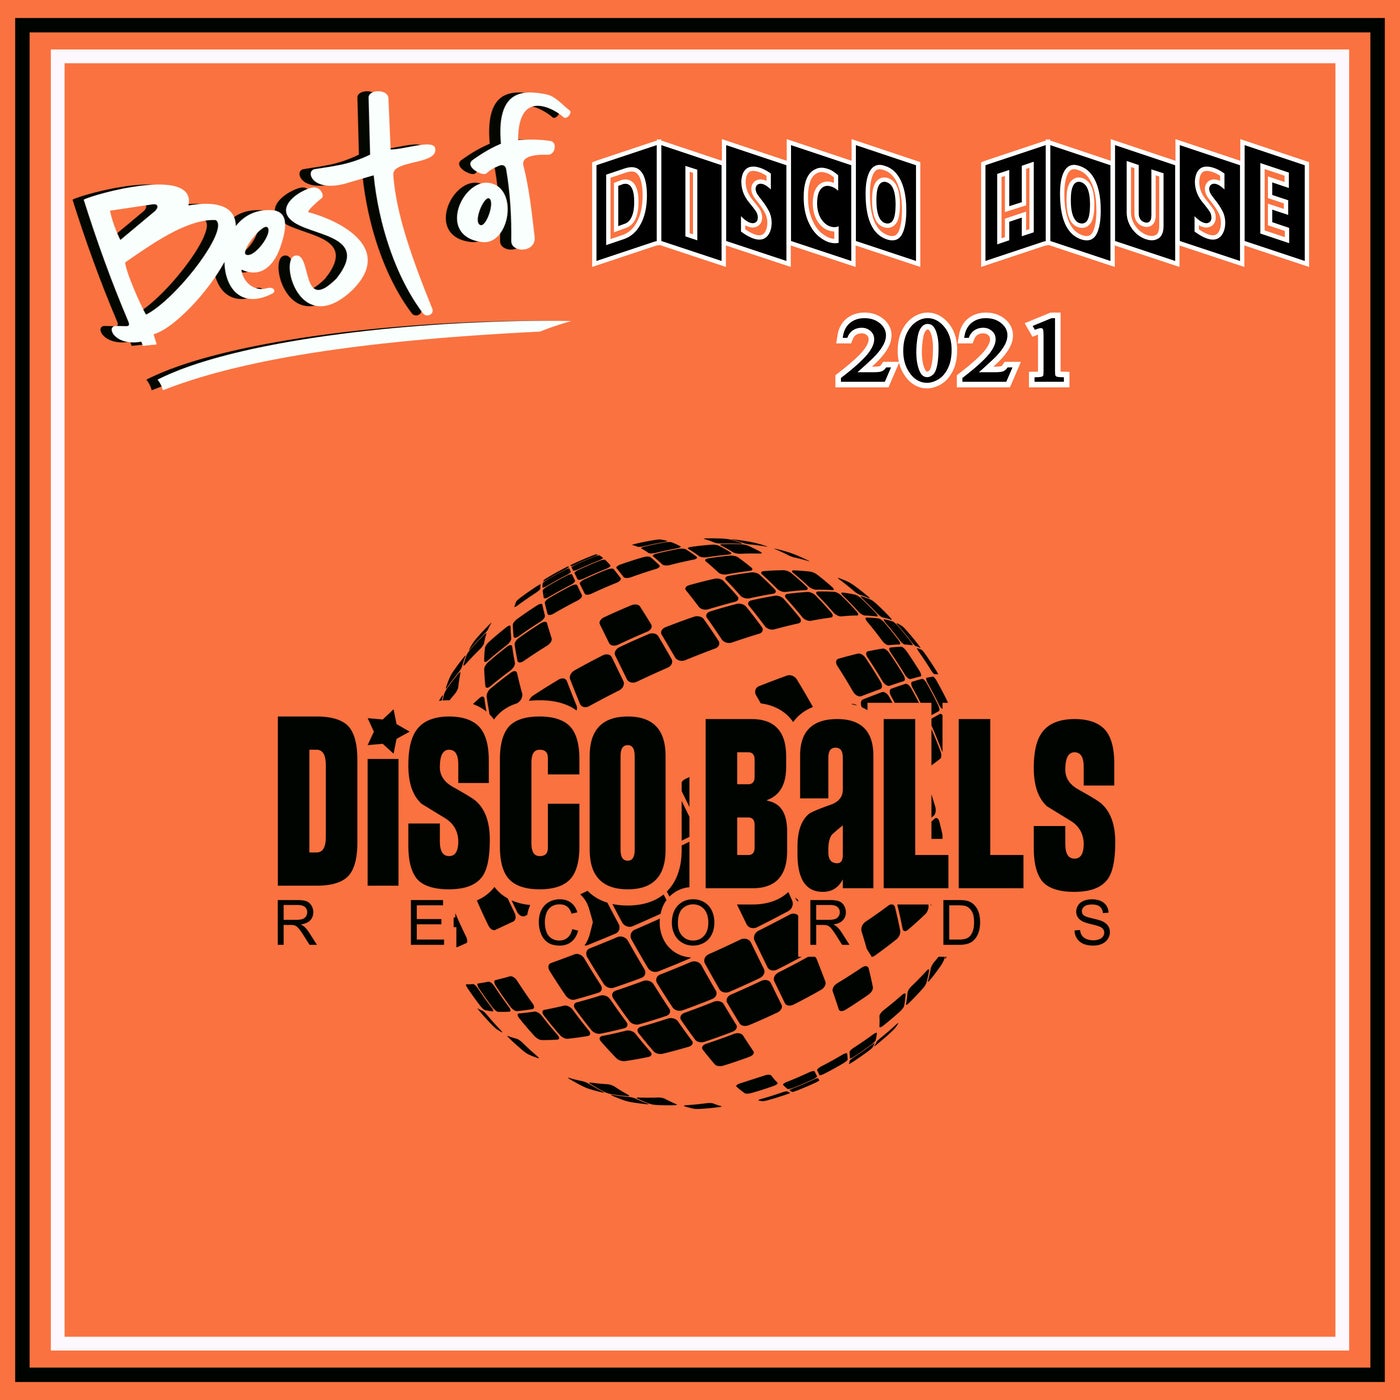 Best Of Disco House 2021